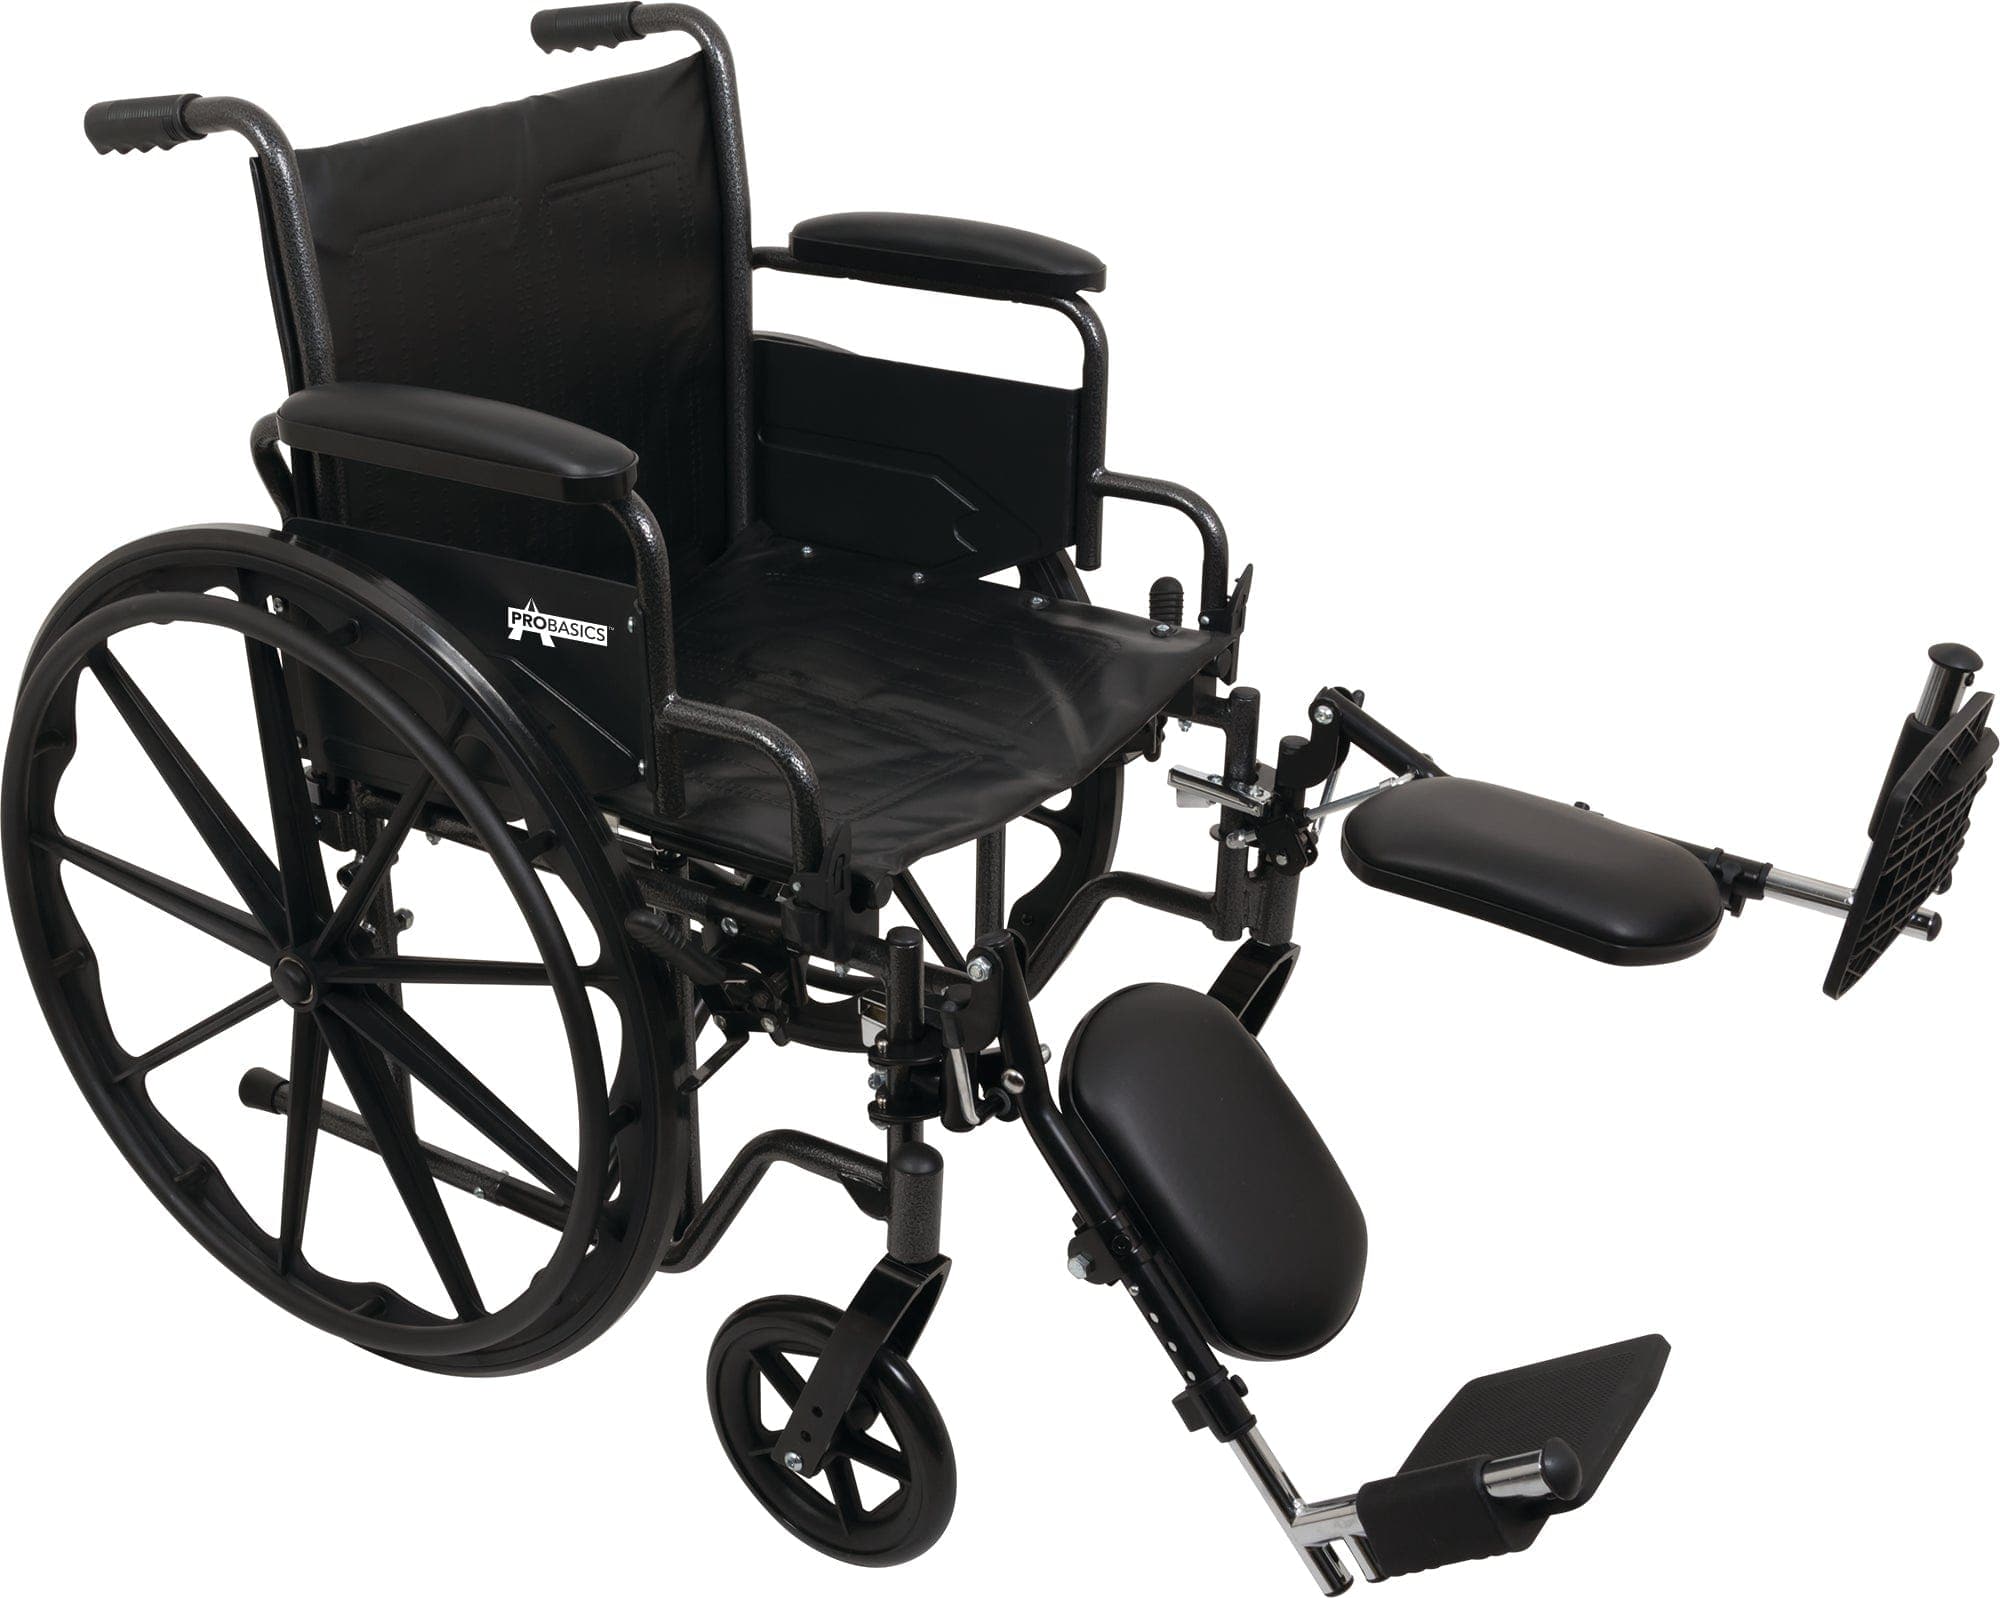 Compass Health K2 Wheelchairs Compass Health ProBasics K2 Wheelchair with 18" x 16" Seat and Elevating Legrests